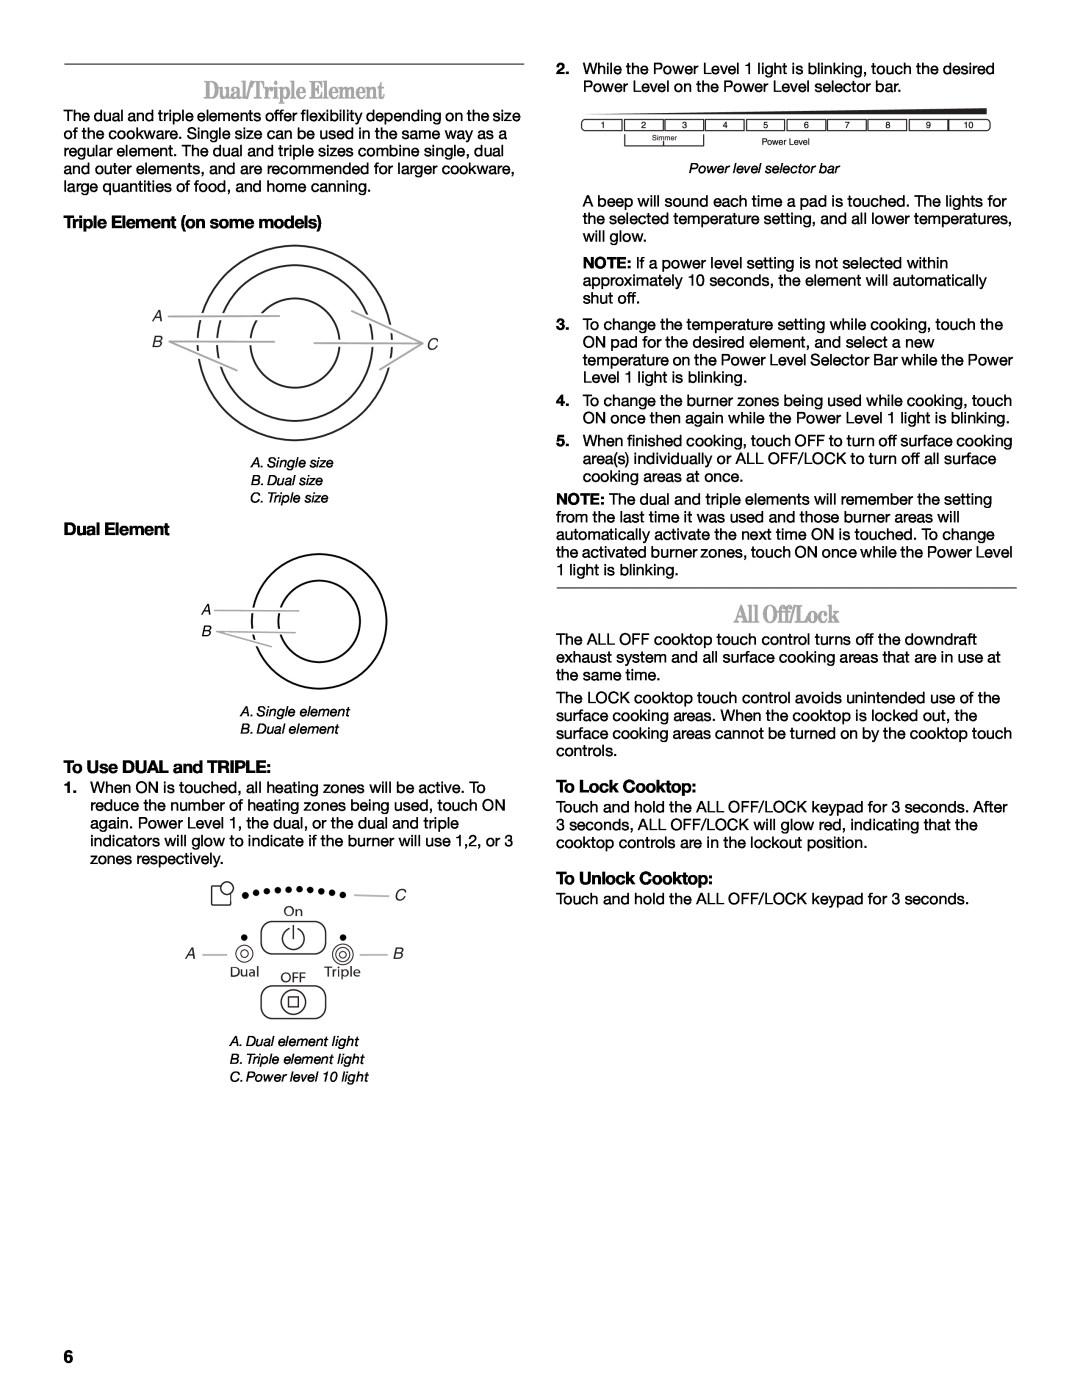 Whirlpool G9CE3675XB Dual/TripleElement, All Off/Lock, Triple Element on some models, Dual Element, To Use DUAL and TRIPLE 